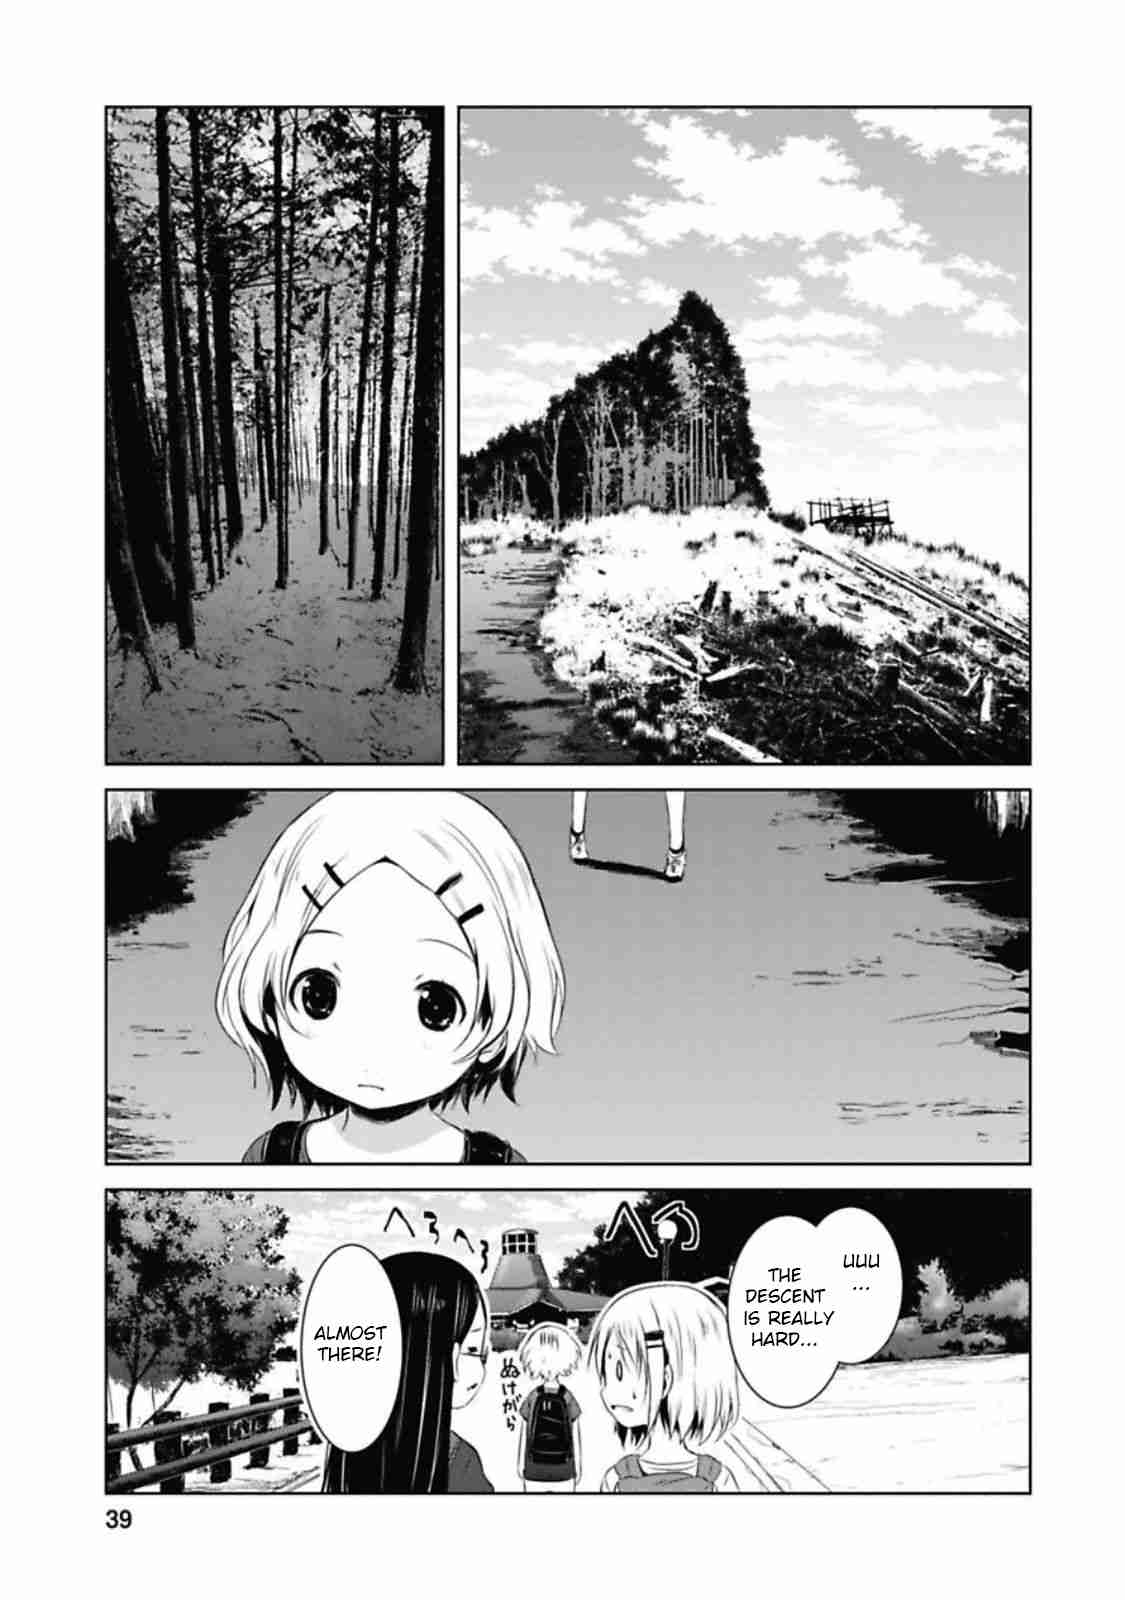 Yama no Susume Vol. 5 Ch. 34 What Can Be Seen From The Summit